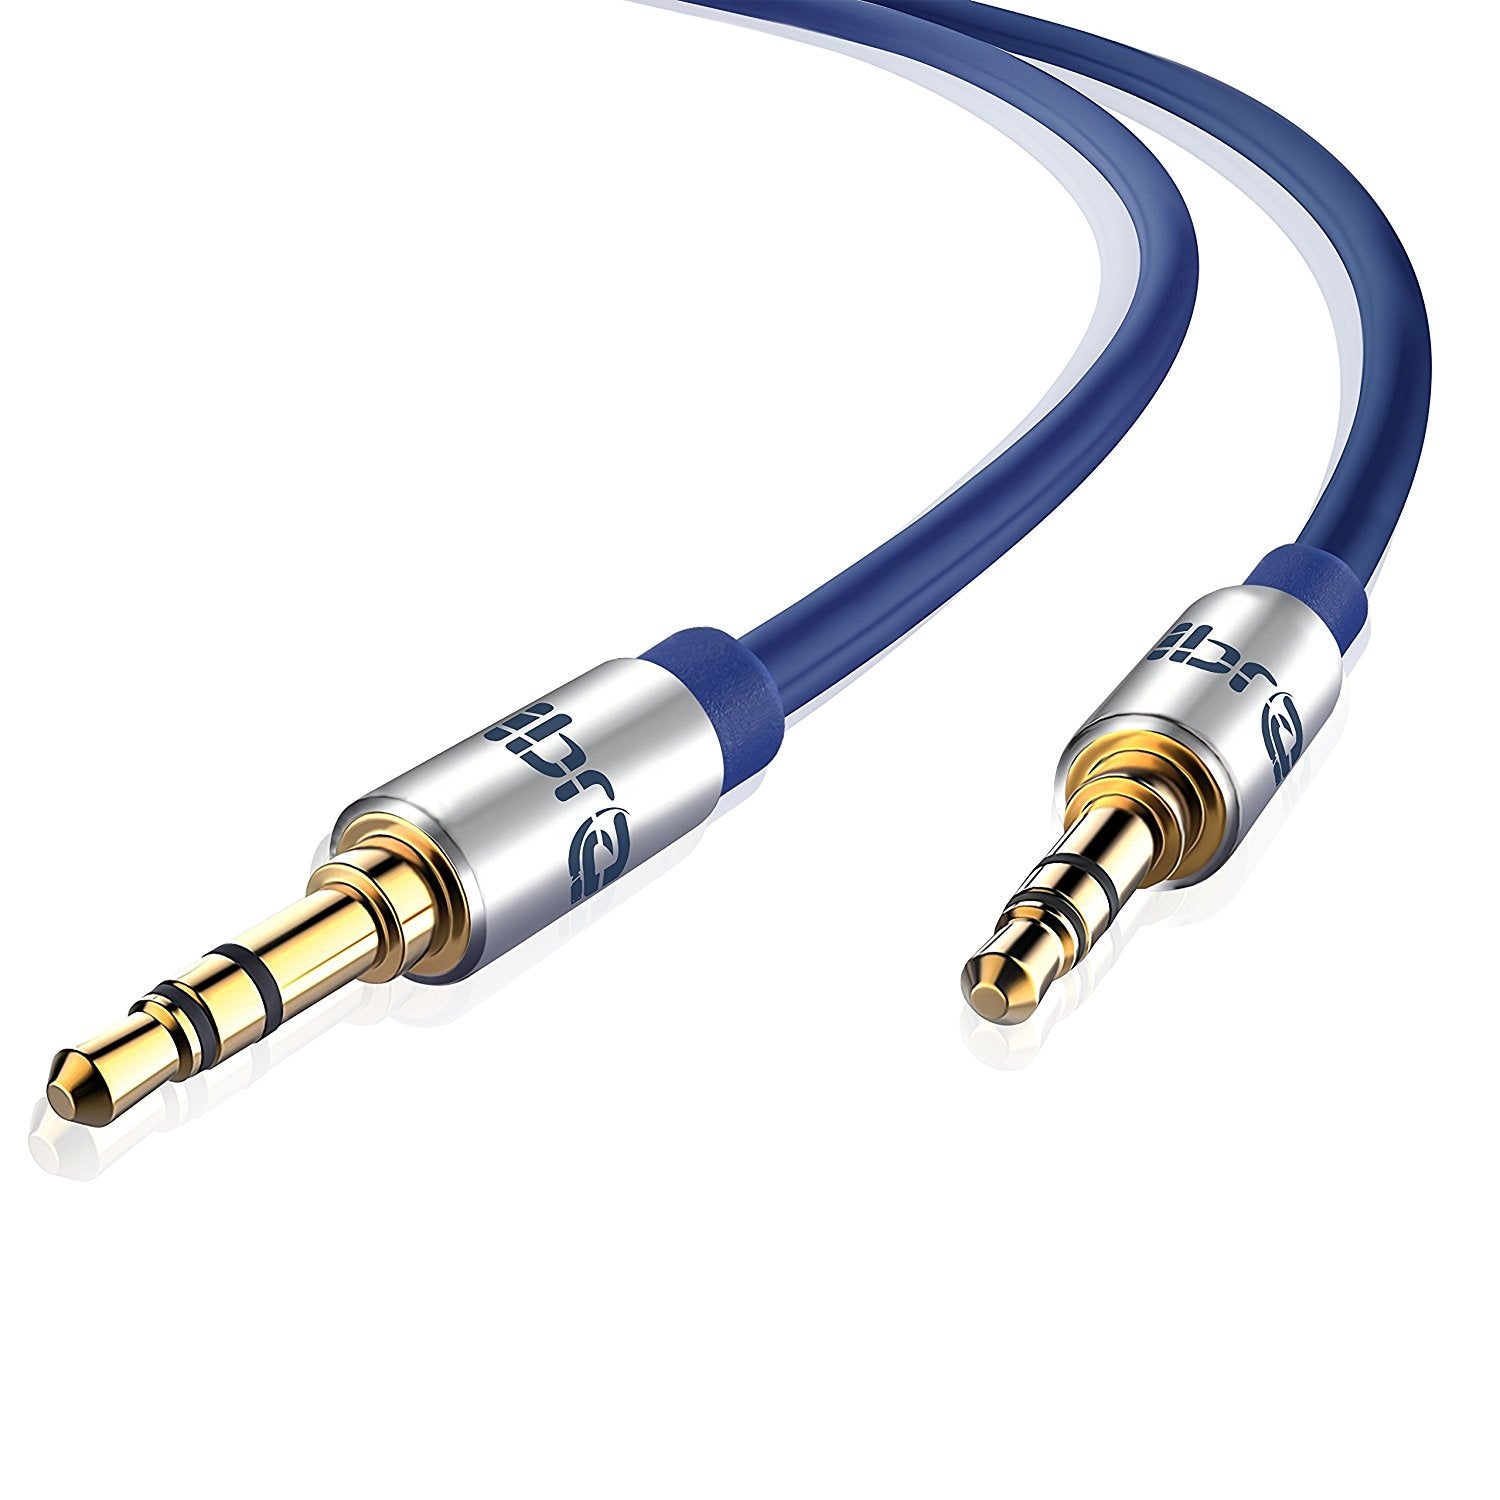 Aux Cable 5M 3.5mm Stereo Pro Auxiliary Audio Cable - for Beats Headphones Apple iPod iPhone iPad Samsung LG Smartphone MP3 Player Home / Car etc - IBRA Blue